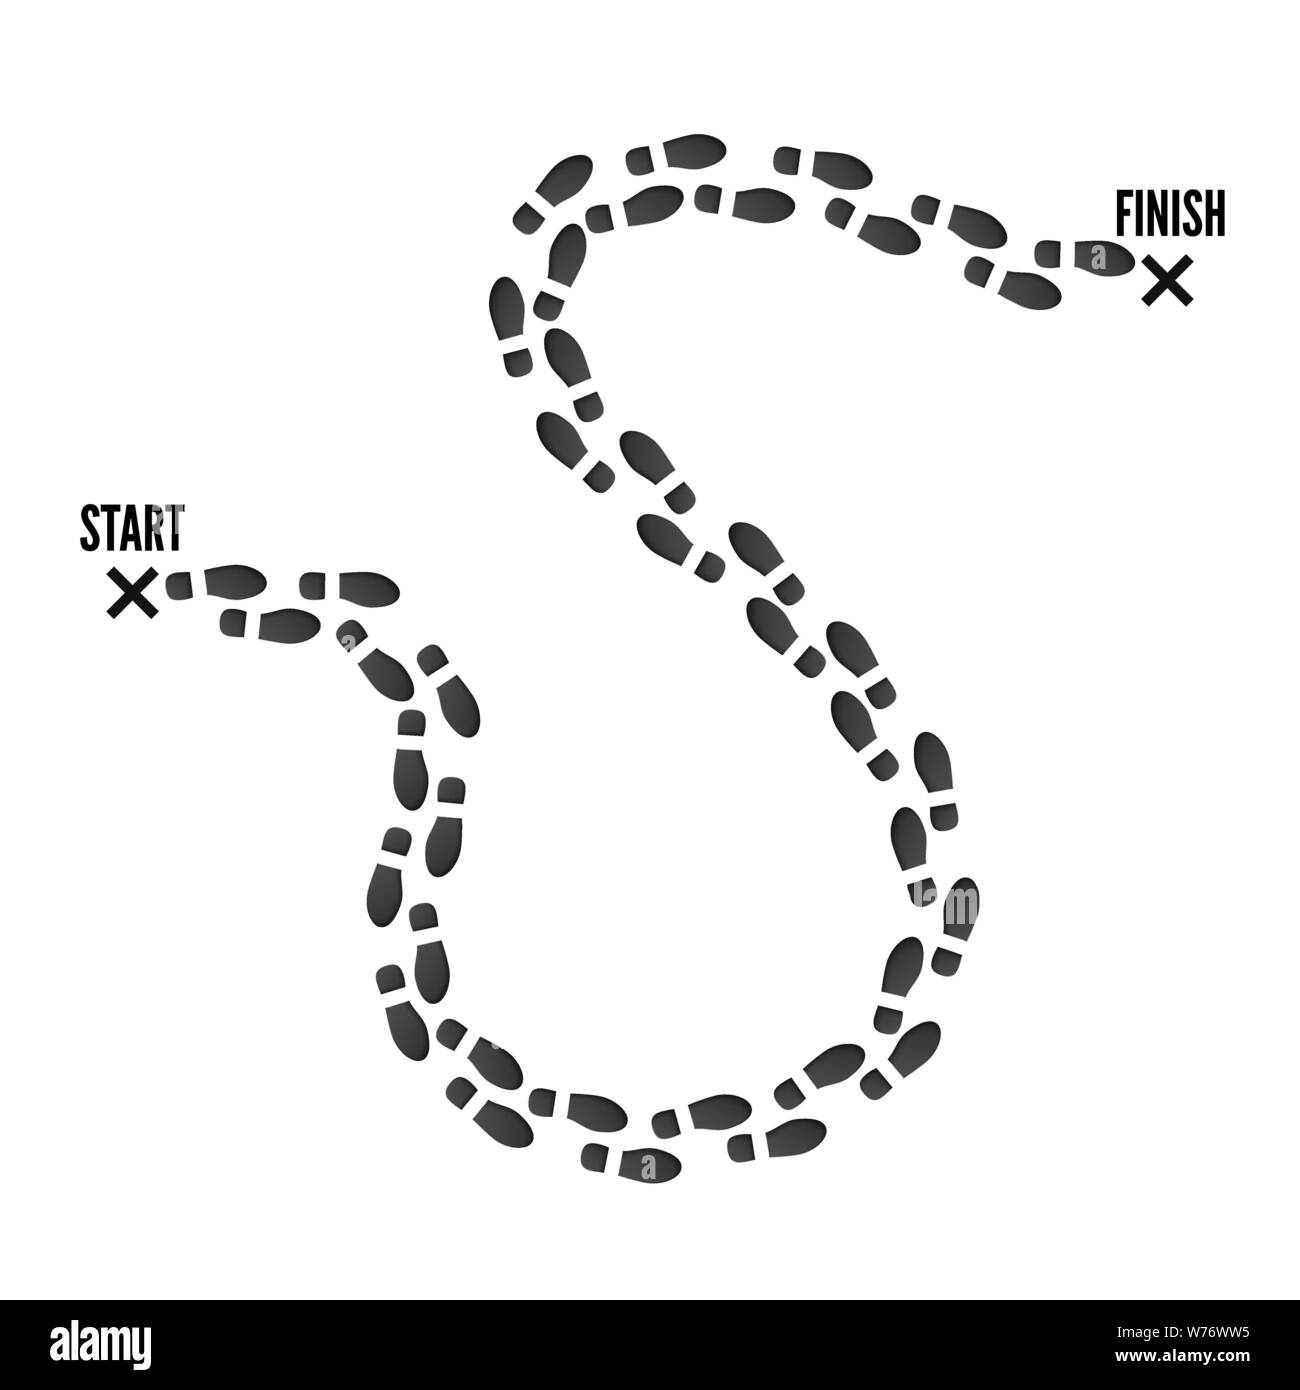 Footprint trail from start point to finish pin. Black print of boots. vector illustration isolated on white background Stock Vector